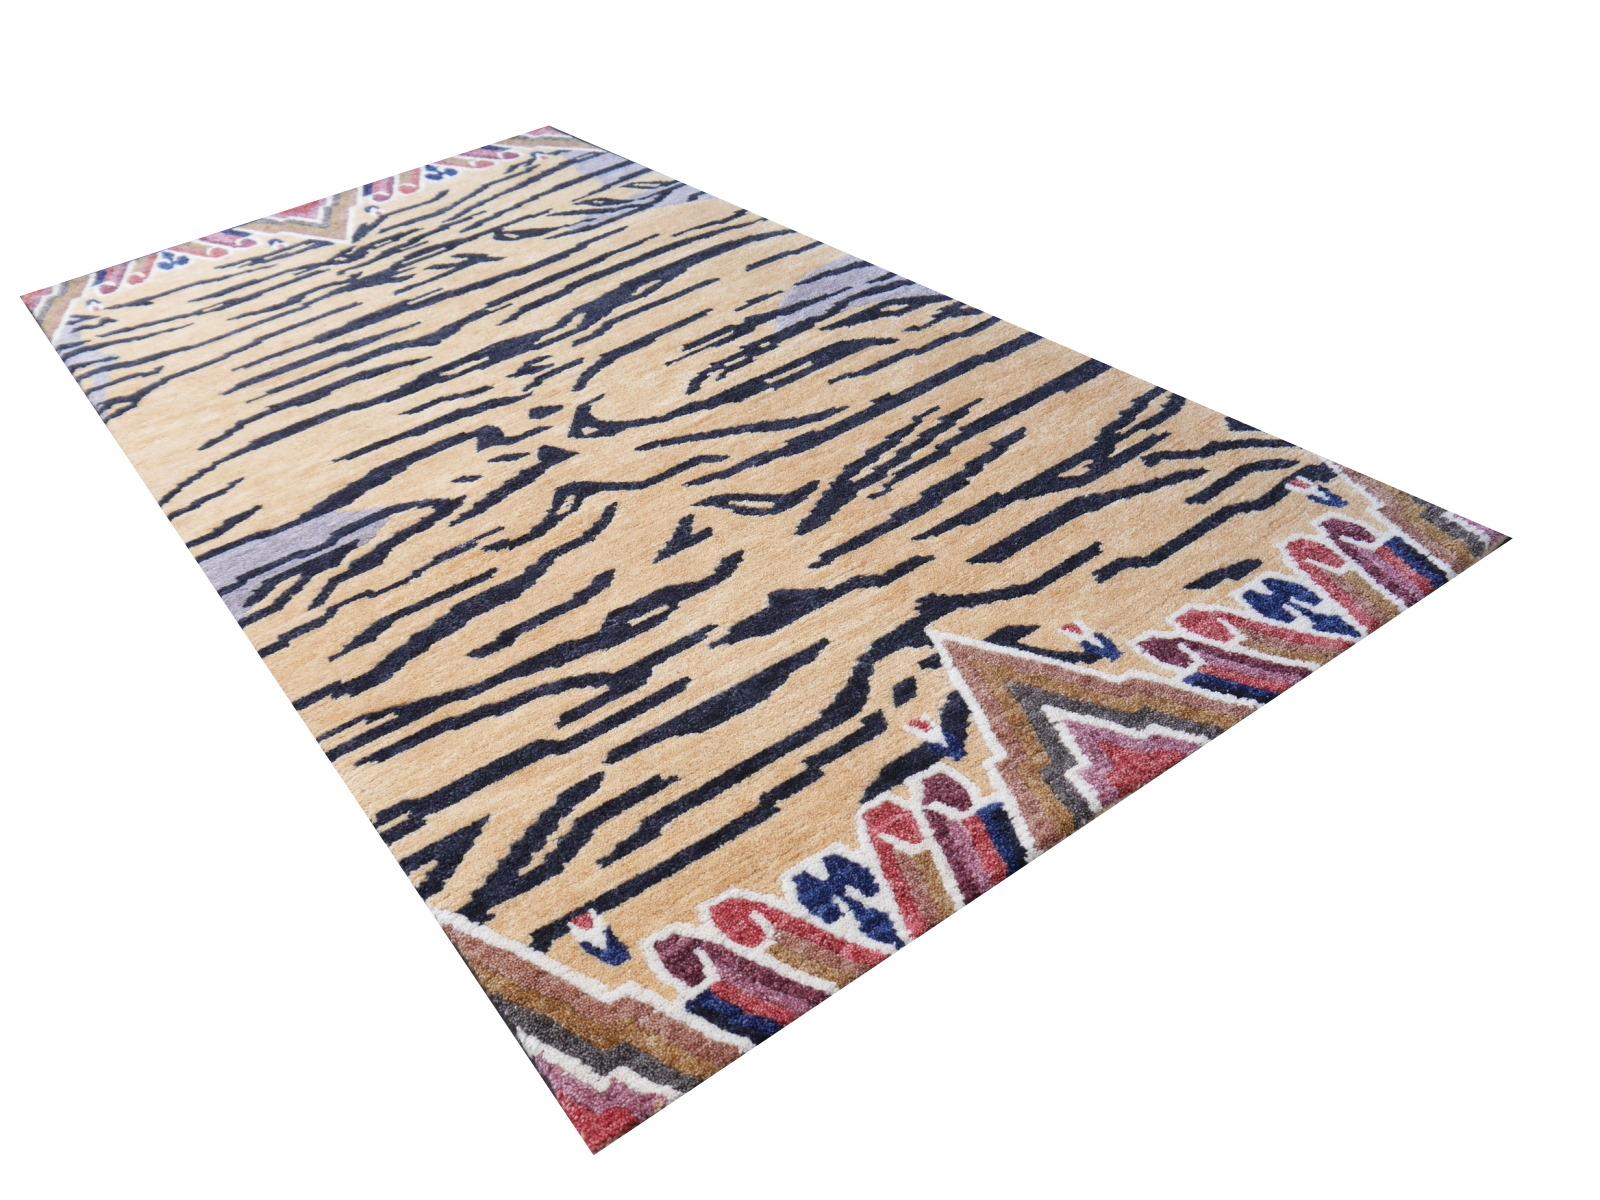 Tibetan Tiger Rug Pure Wool Hand Knotted by Djoharian Collection Antique Design 11